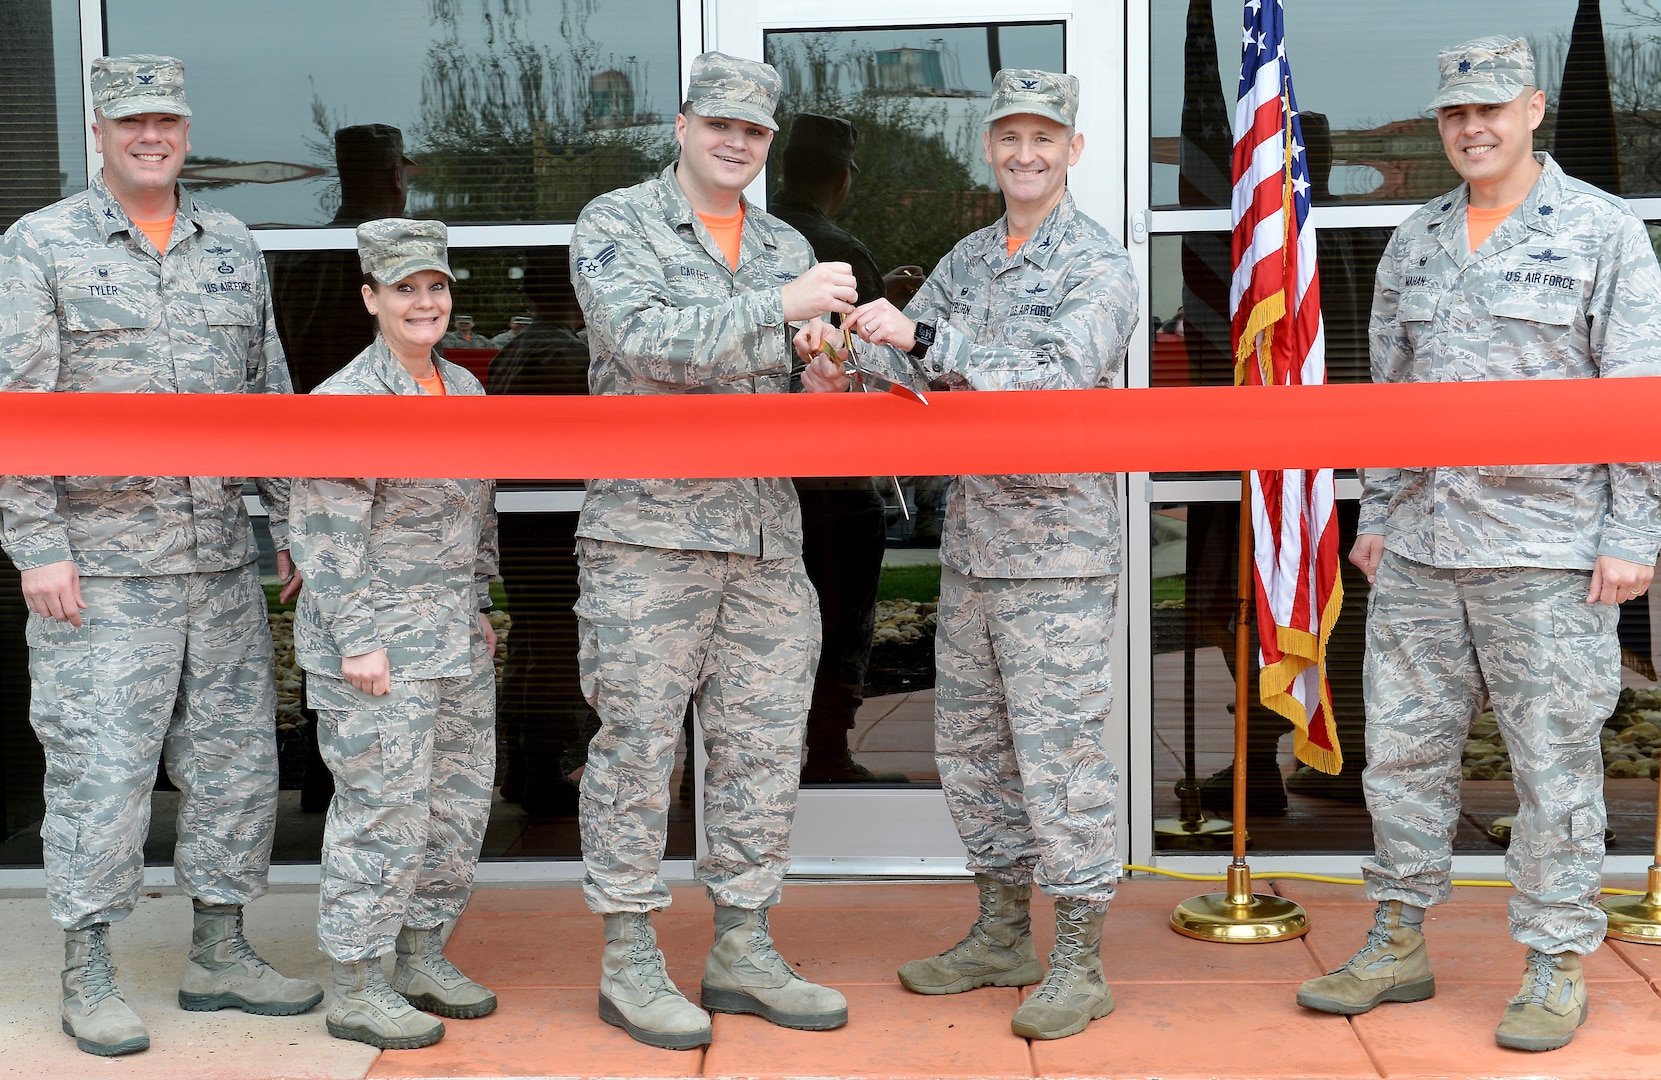 67th Cyberspace Wing leaders cut the ribbon to mark the opening of a new offensive cyberspace operations training location in San Antonio, Texas, Feb. 23, 2018. Cyberspace operators will receive centralized and standardized training at the new location, which aims to host its first class in March 2018. (U.S. Air Force photo by Tech. Sgt. R.J. Biermann)